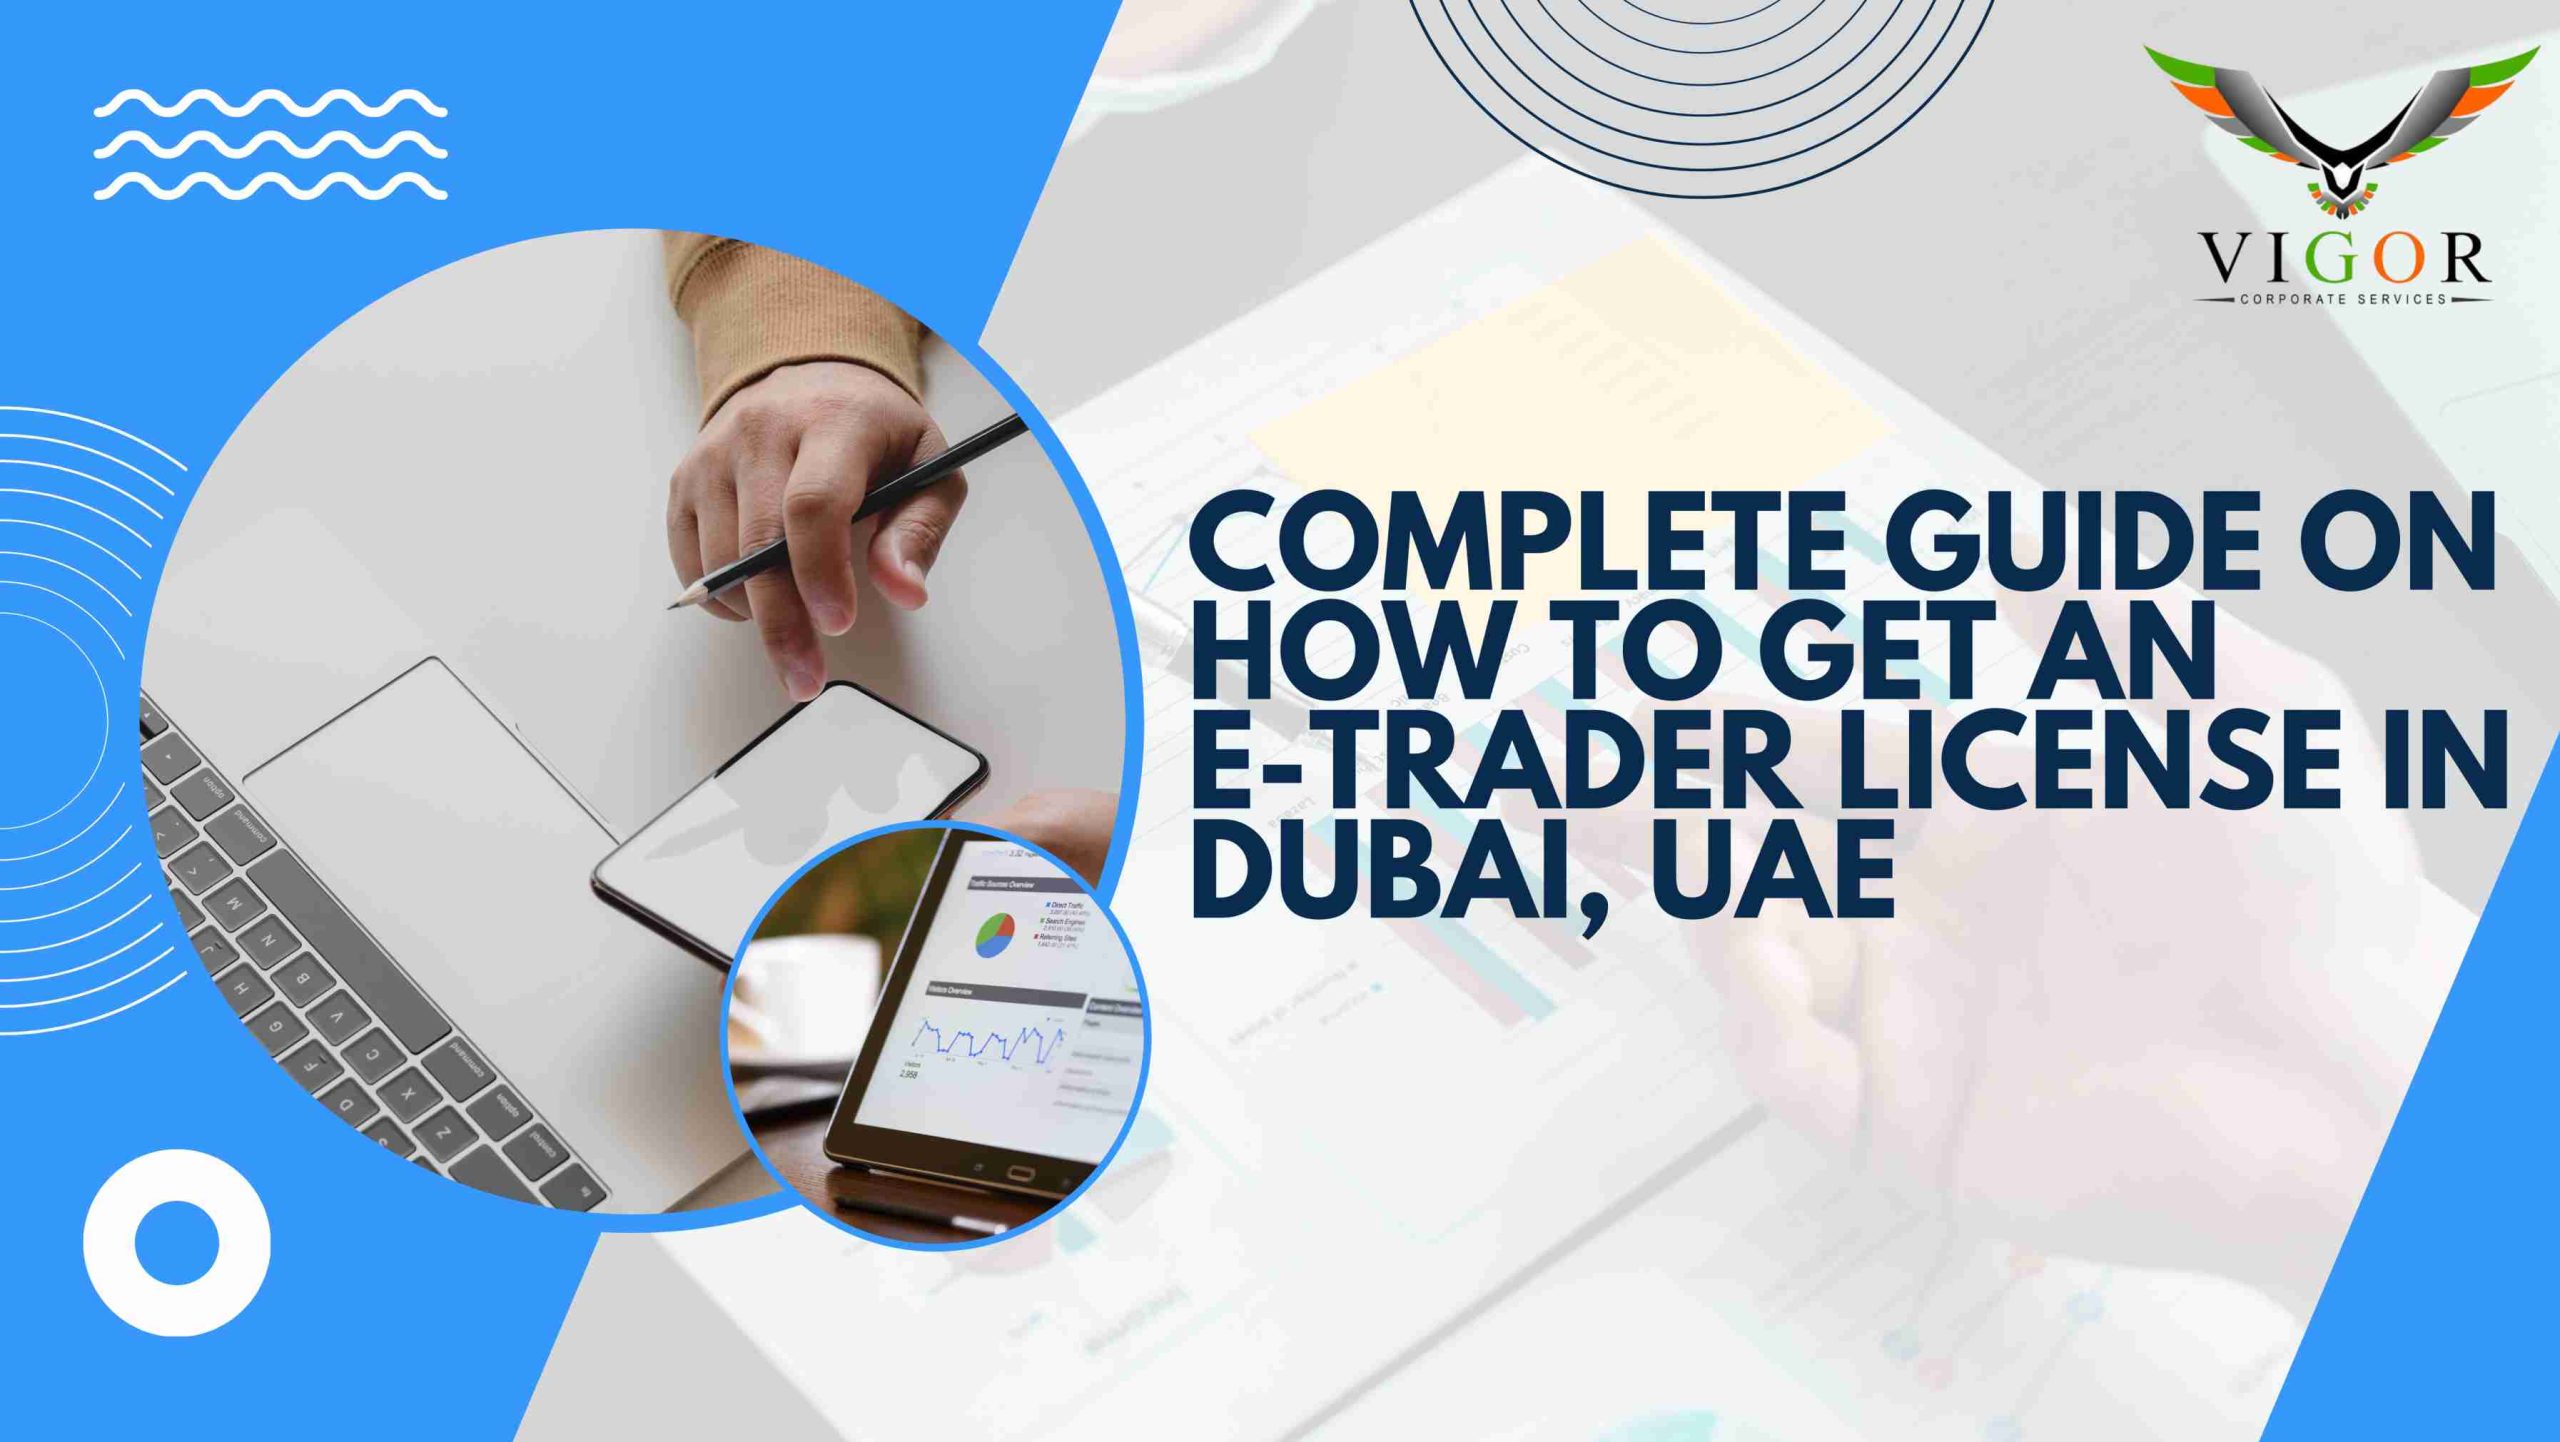 Complete Guide on How to Get an E-Trader License in Dubai, UAE